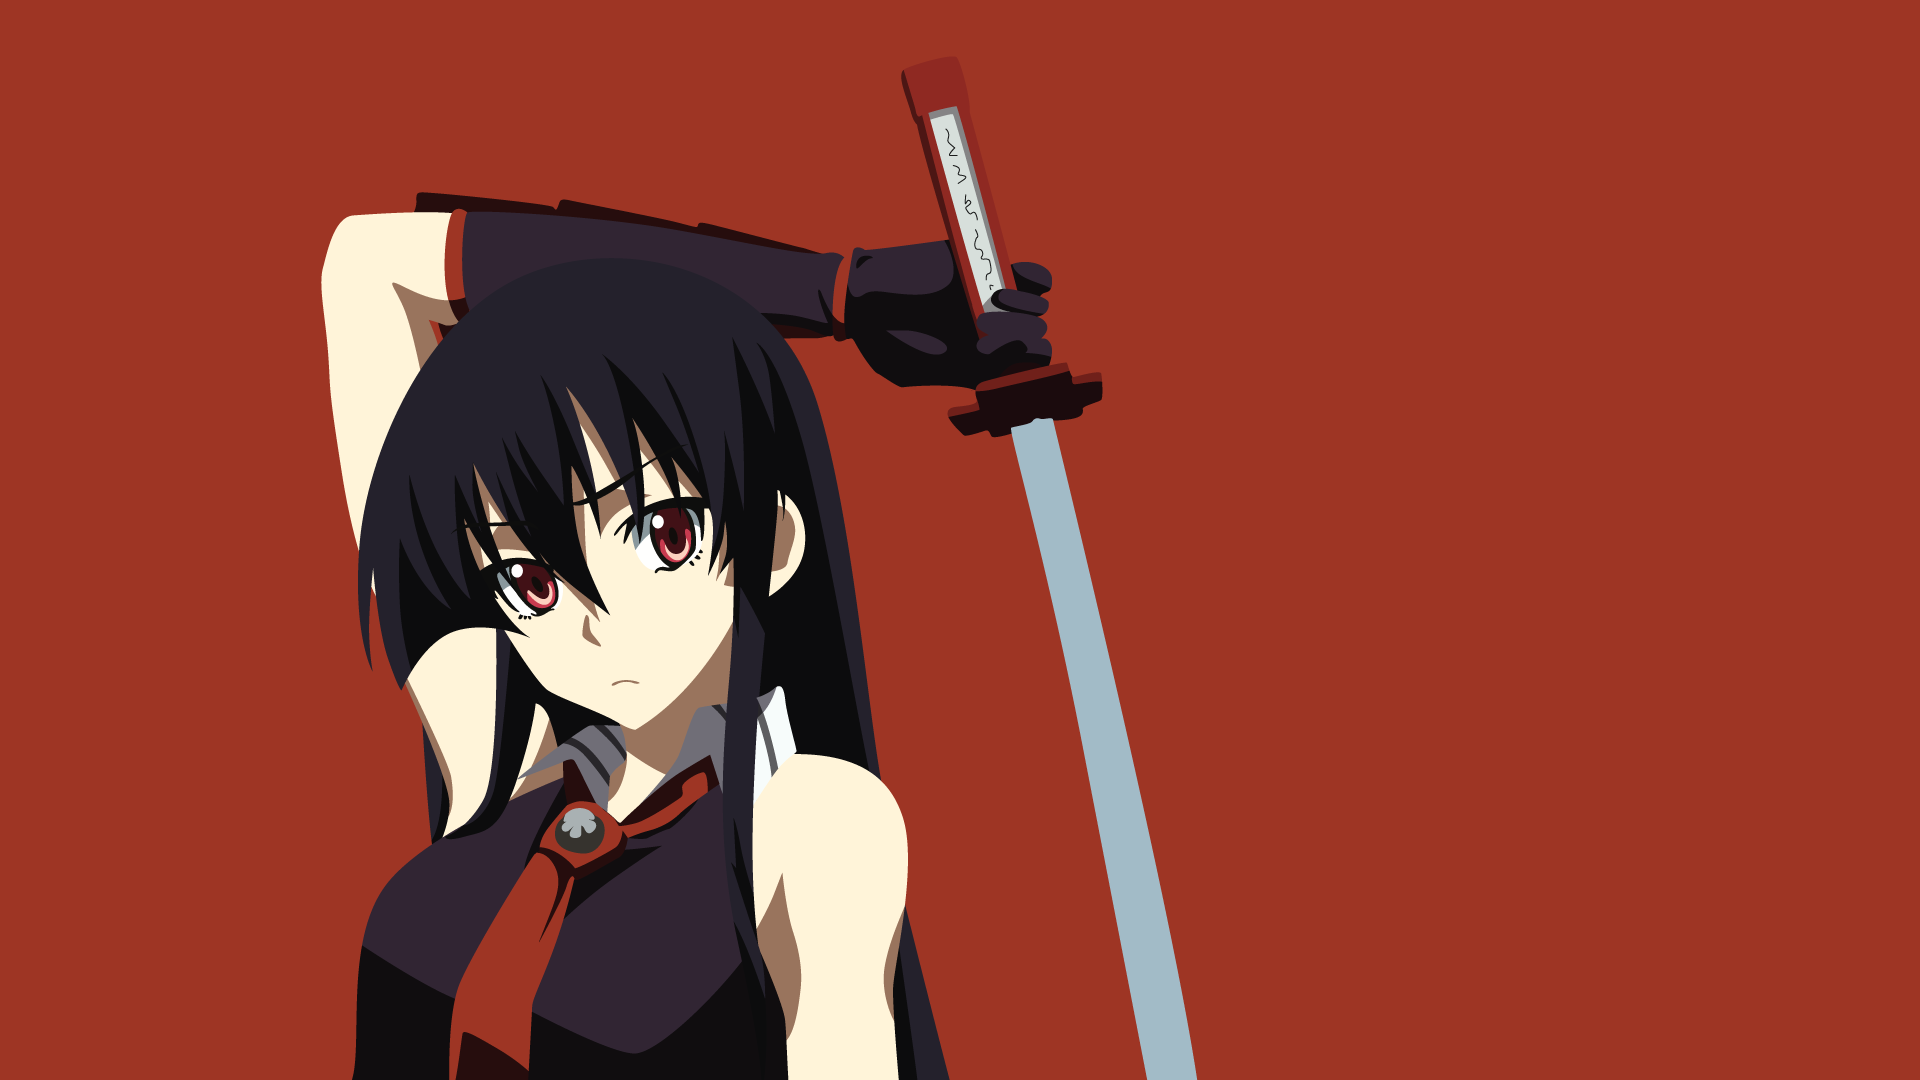 Anime 1920x1080 anime anime girls Akame sword tie red eyes weapon red background simple background looking at viewer black hair long hair girls with guns women with swords